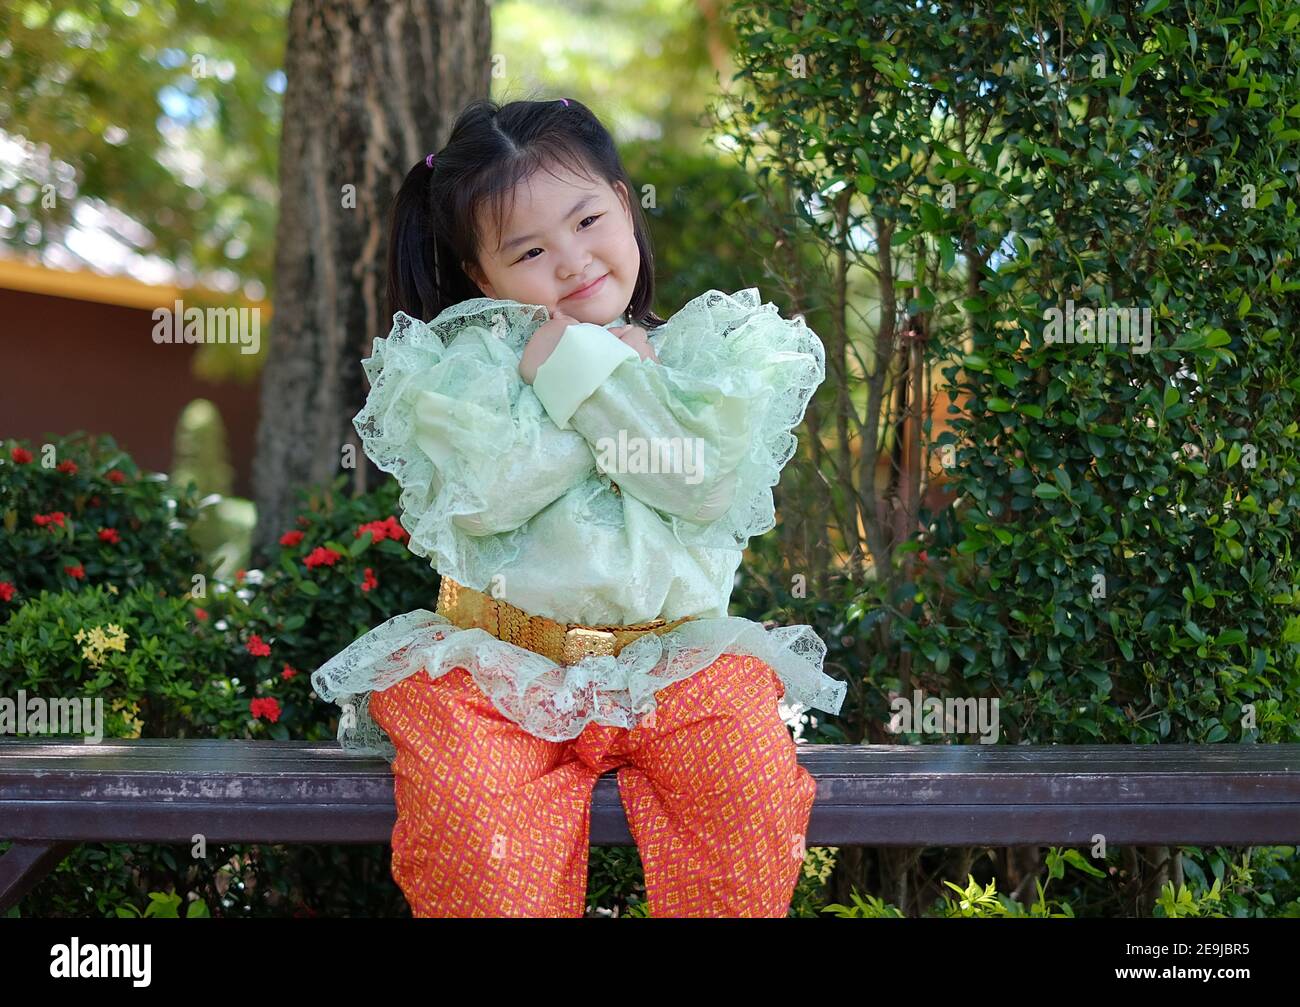 A cute young Asian girl is wearing a traditional green and orange Thai costume during Songkran festival in Thailand. Stock Photo